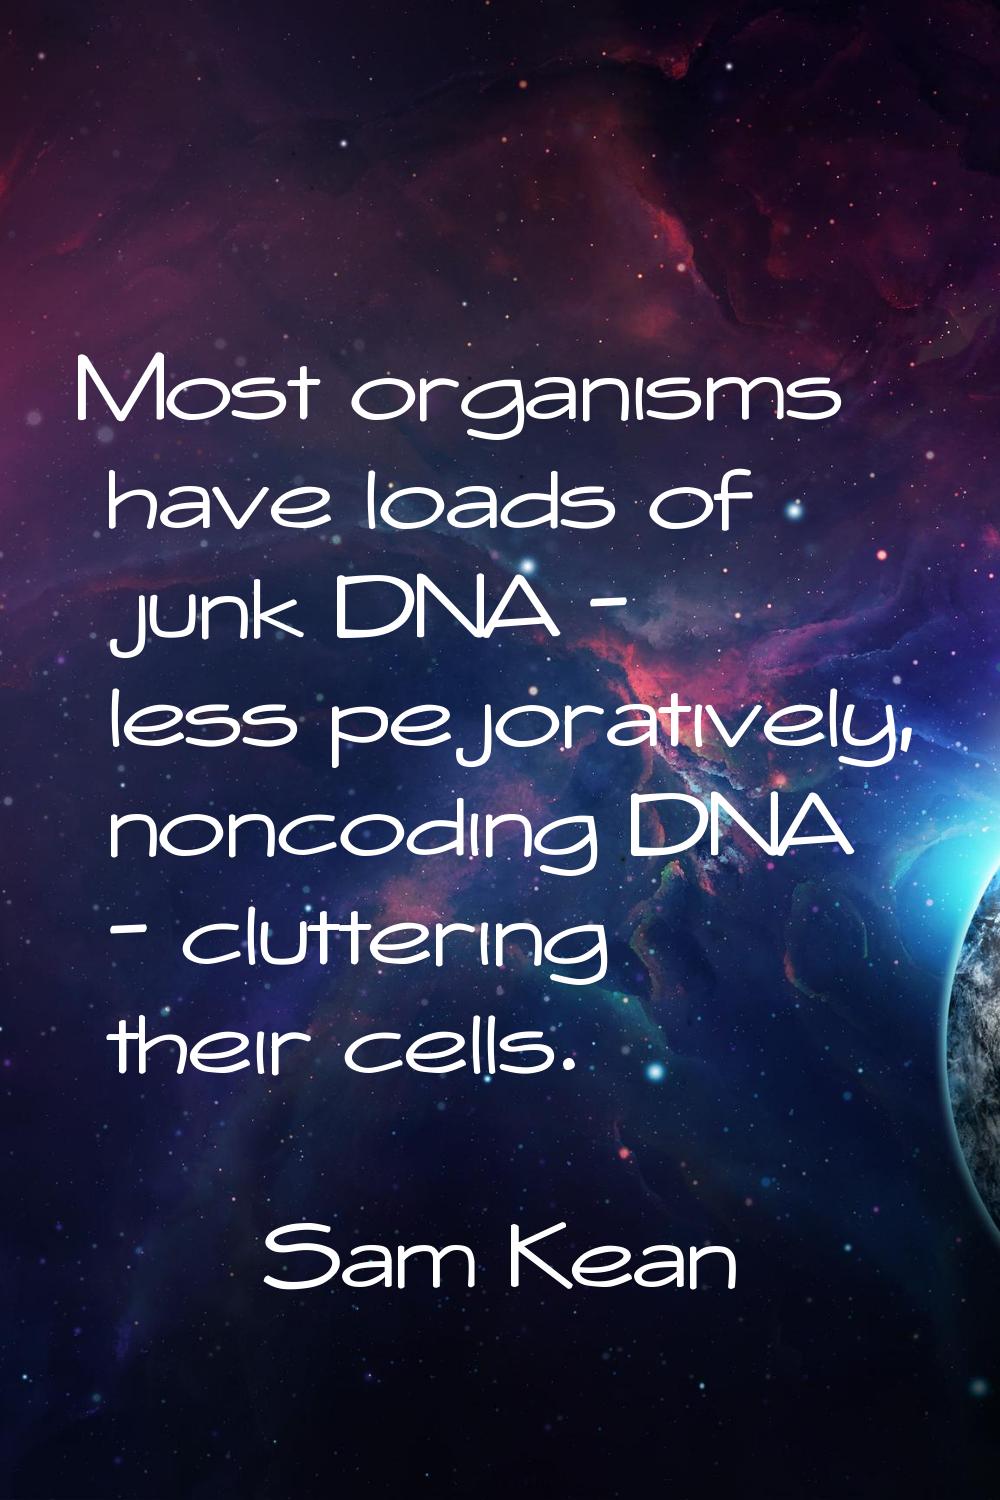 Most organisms have loads of junk DNA - less pejoratively, noncoding DNA - cluttering their cells.